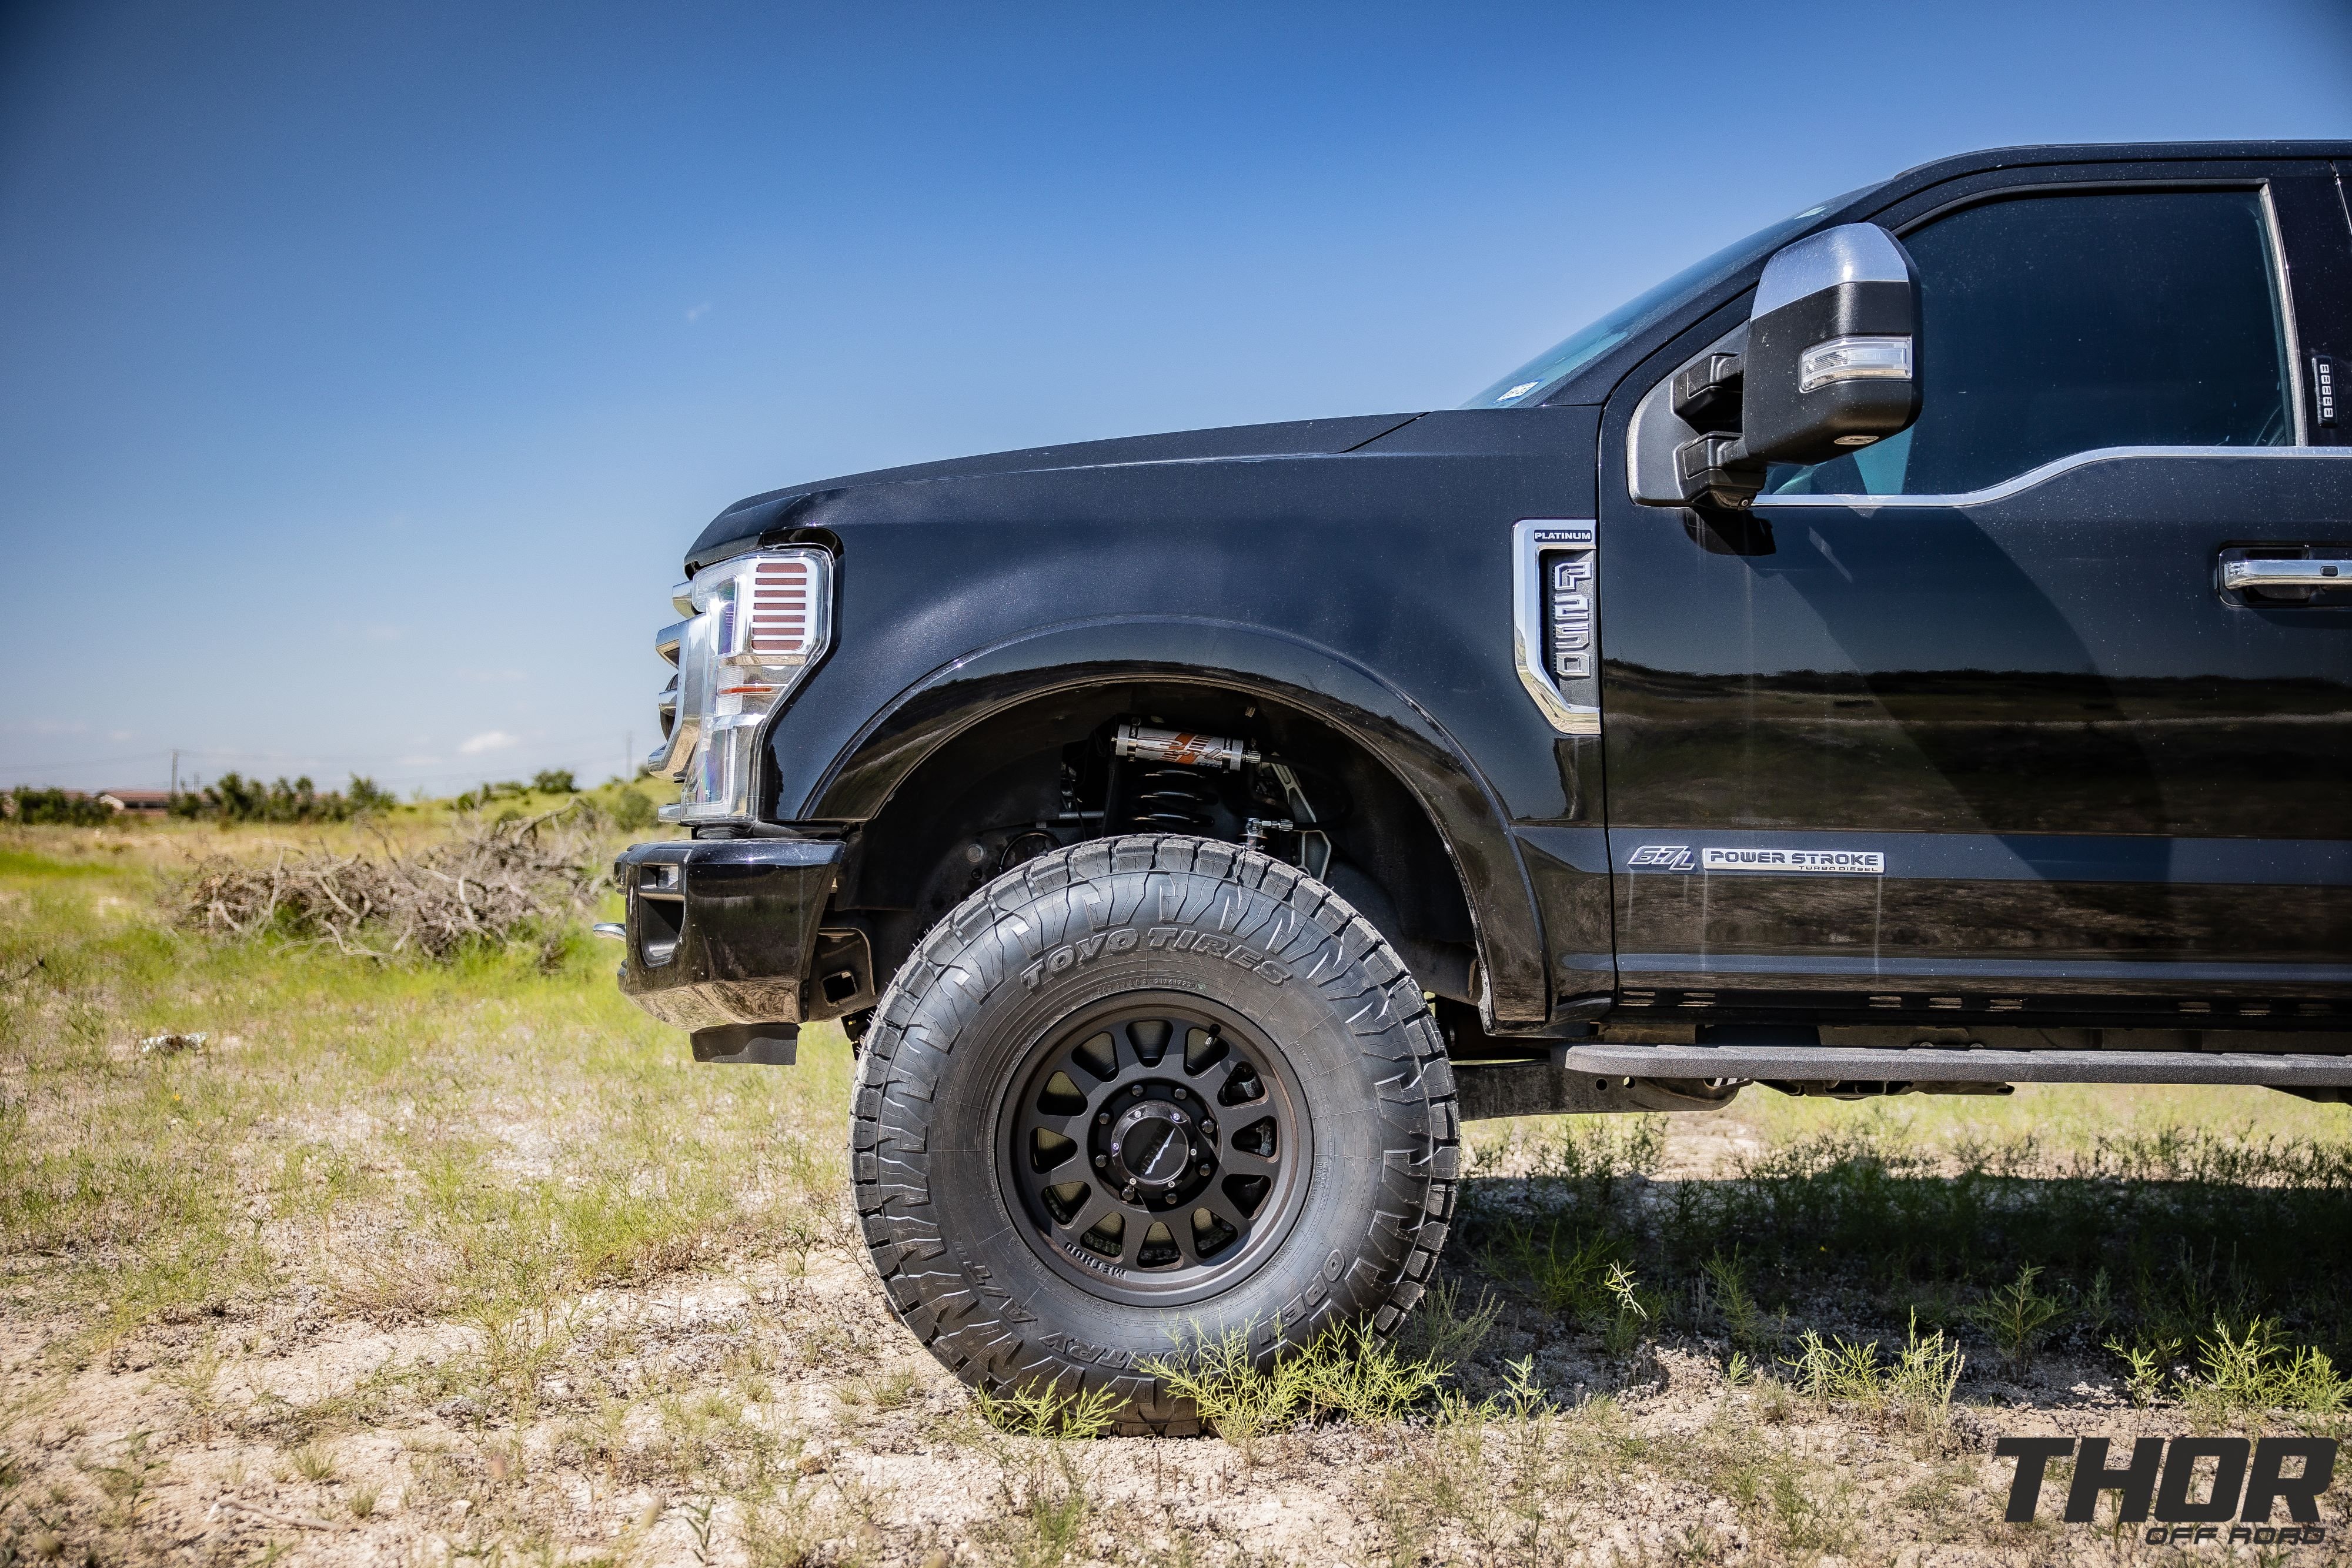 2022 Ford F-250 Super Duty Platinum in Black with Carli Backcountry 3.5" Suspension Kit, Carli High Mount Steering Stabilizer, Carli Torsion Sway Bar, Method MR704 HD 17x9" Bead Grip Wheels, 37x12.50R17 Toyo Open Country A/T III Tires